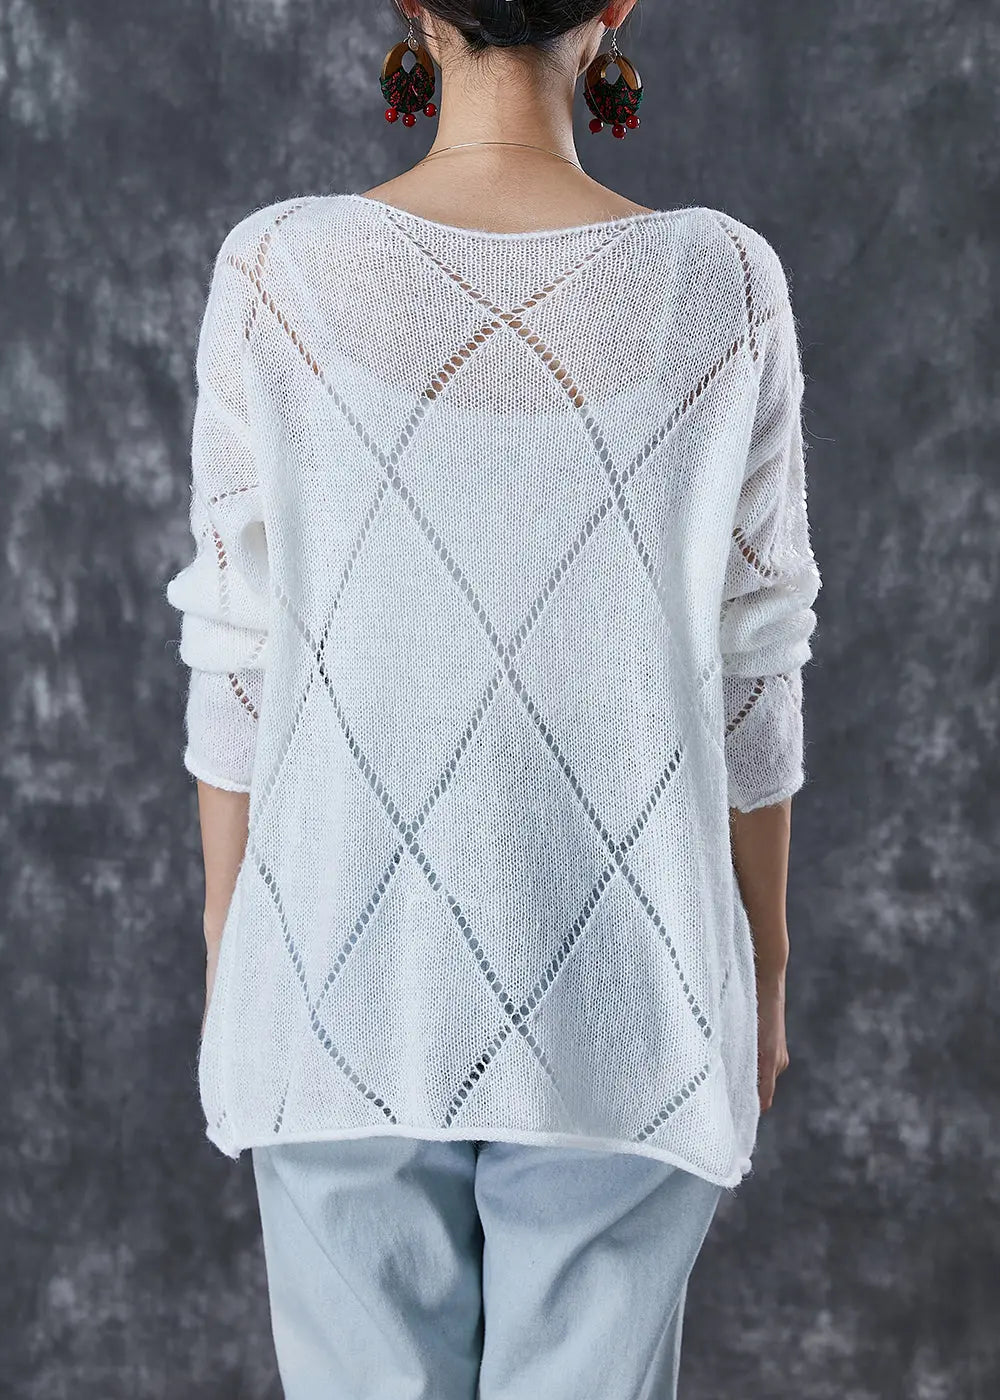 Bohemian White Sequins Hollow Out Knit Sweater Fall Ada Fashion